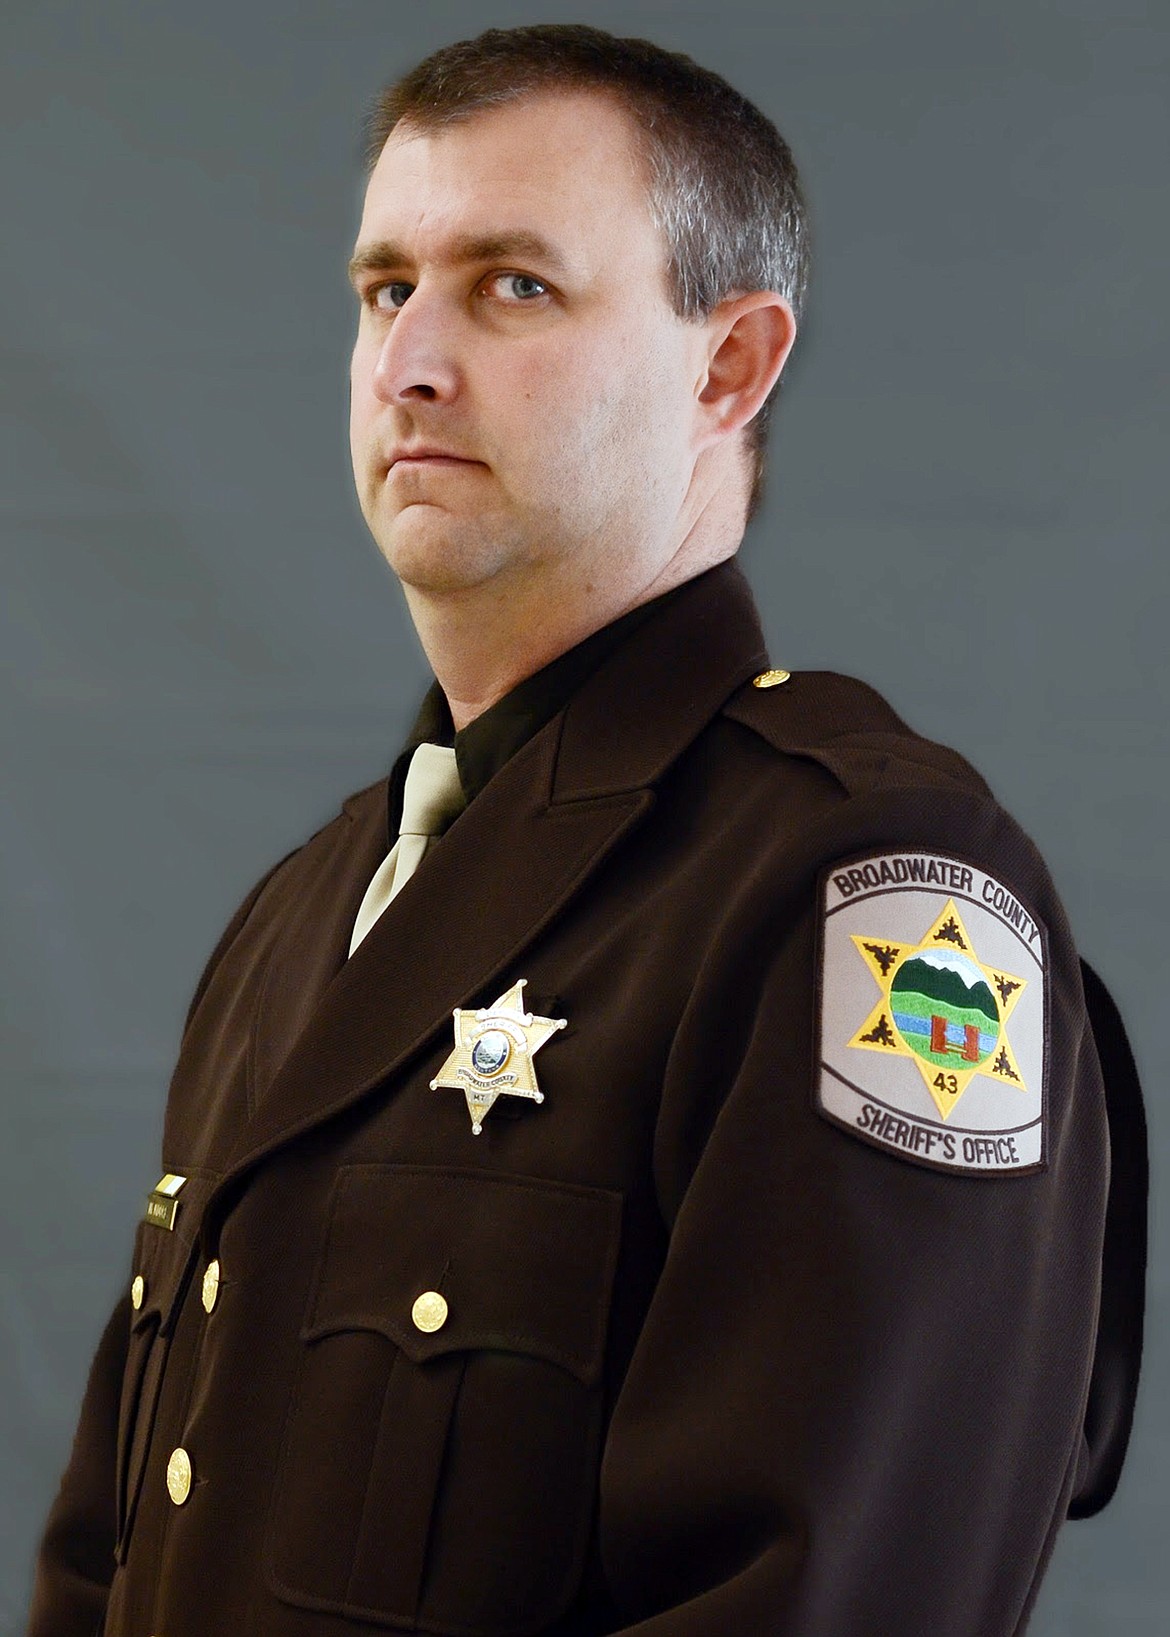 This undated photo provided by the Broadwater County Sheriff's Office shows Deputy Mason Moore, 38. Moore was killed early Tuesday, May 16, 2017, in a shootout that prompted a middle-of-the-night pursuit that spanned more than 100 miles (161 kilometers) across southwestern Montana, involving several law enforcement agencies. Before sunrise, the chase had ended with the vehicle driving on its rims, a suspect shot and hospitalized and his father under arrest, officials said. (Broadwater County Sheriff's Office via AP)